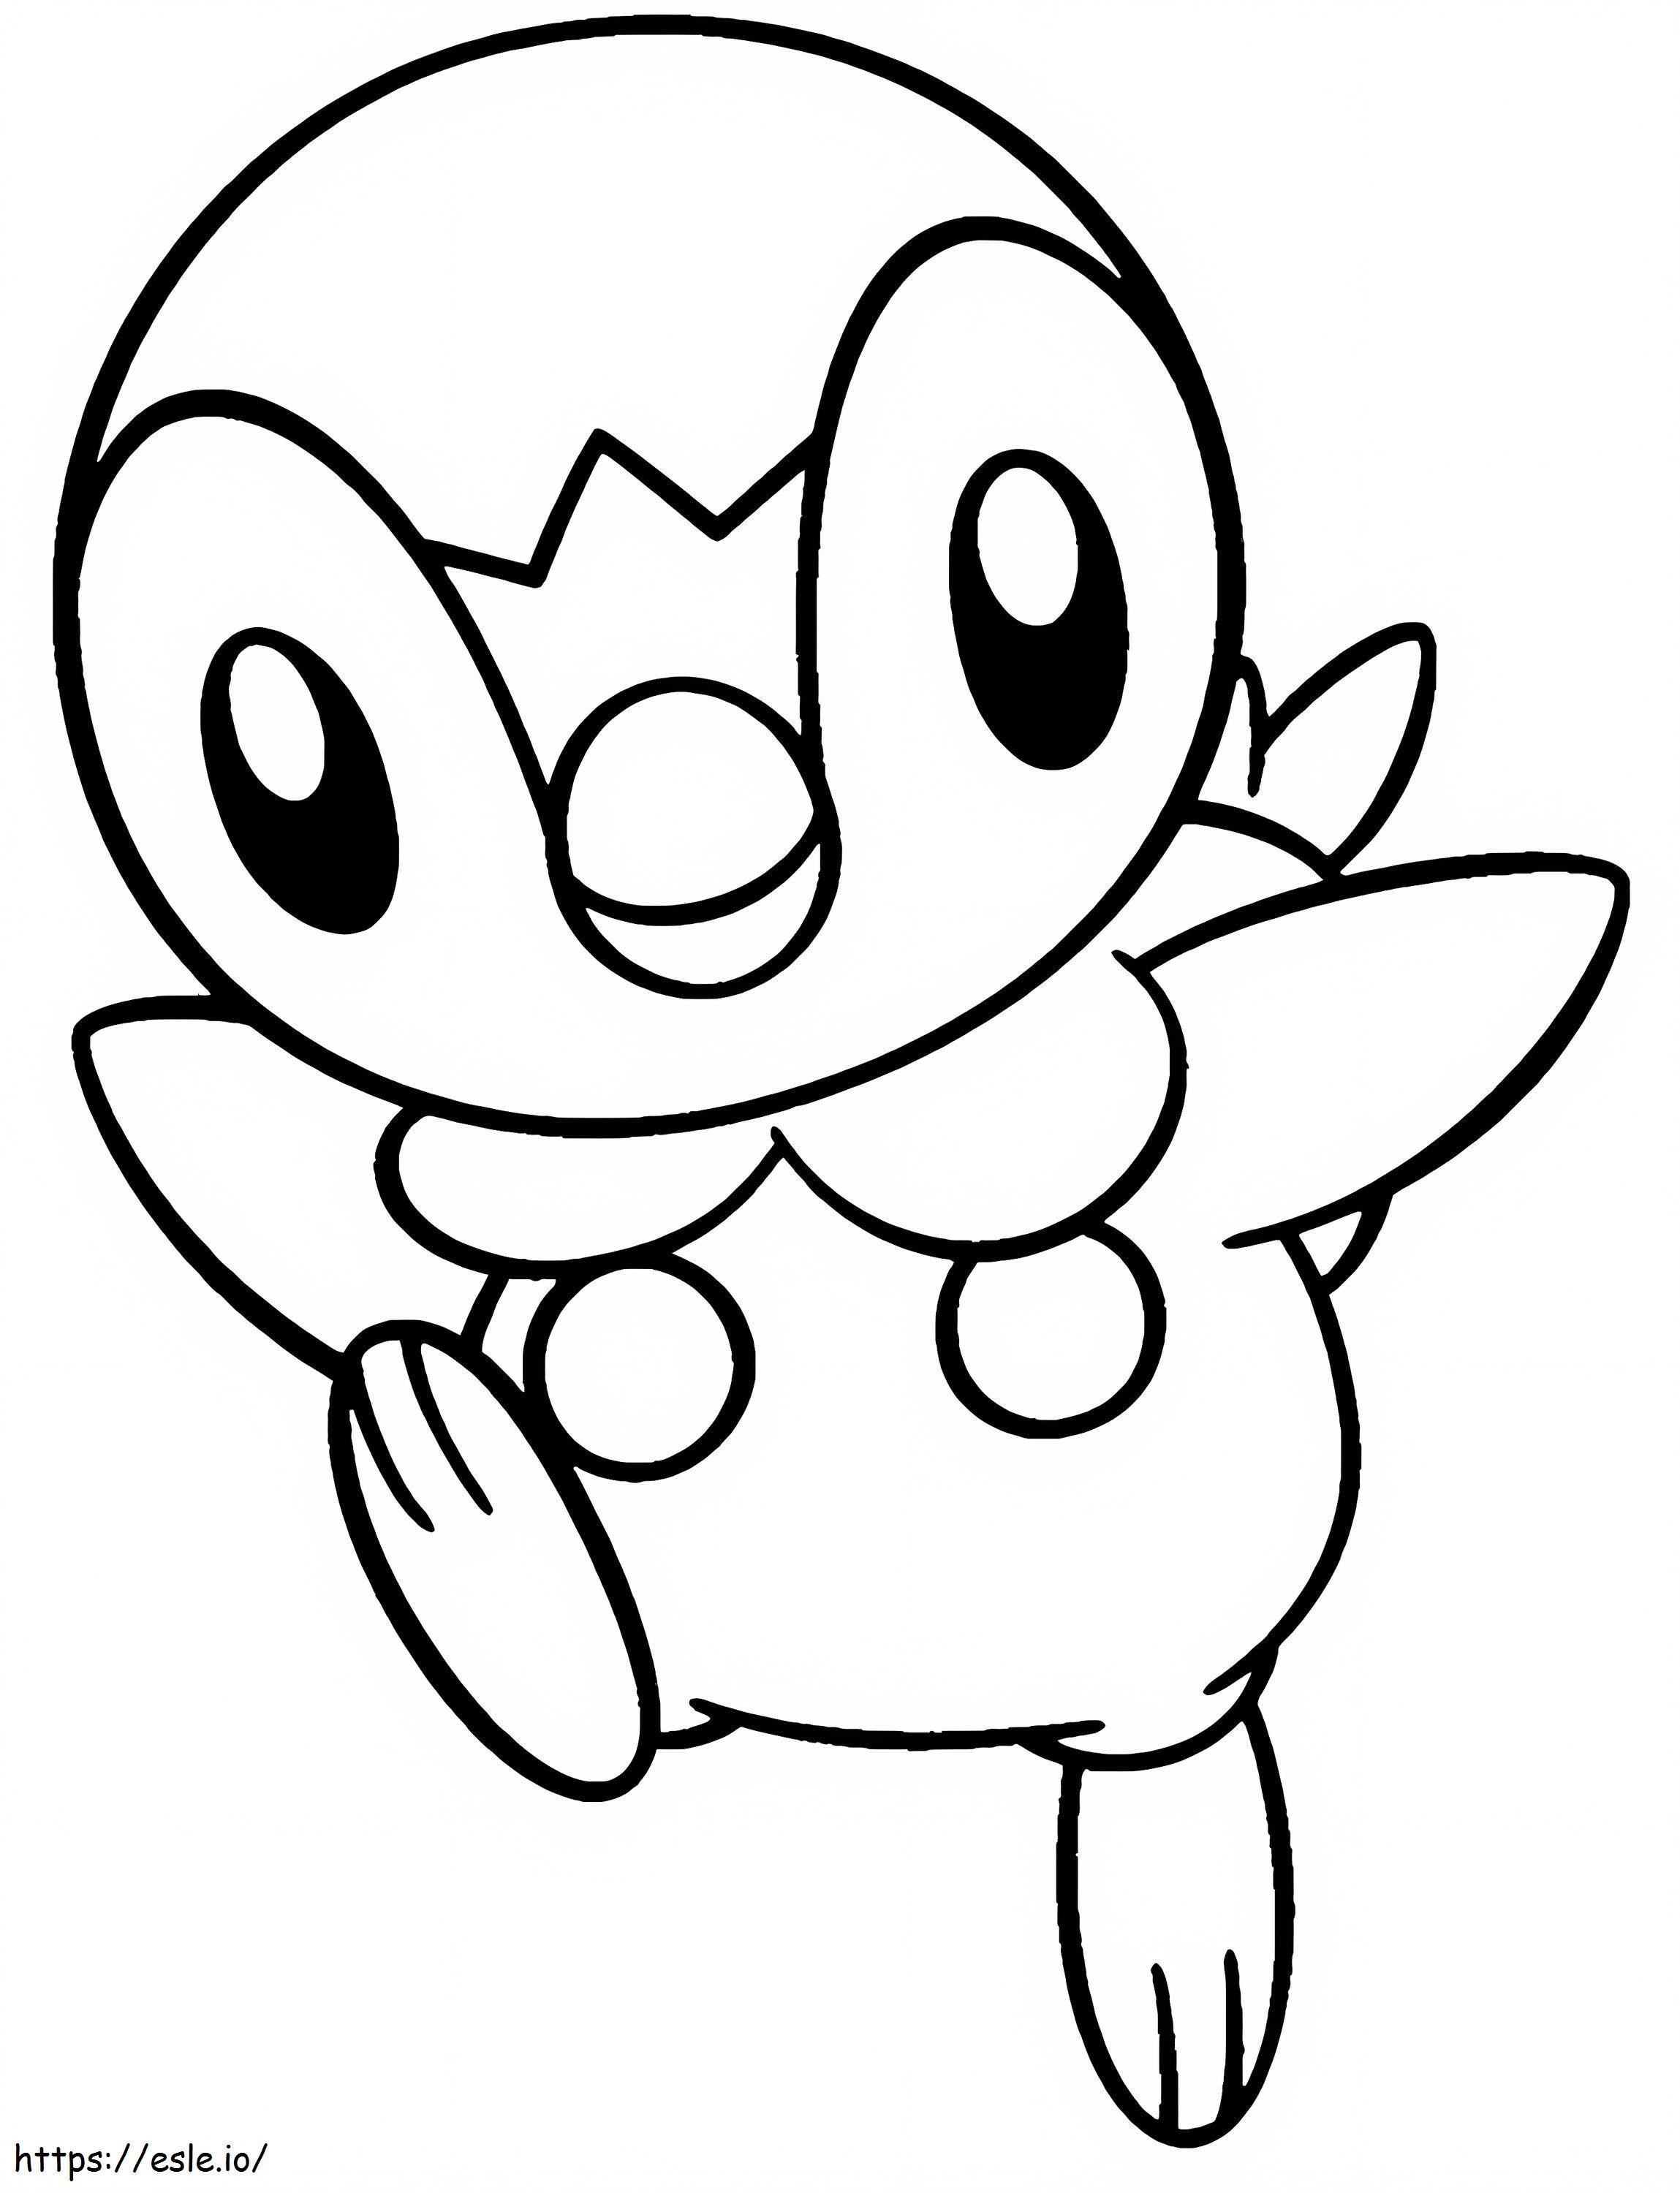 Printable Piplup Pokemon coloring page